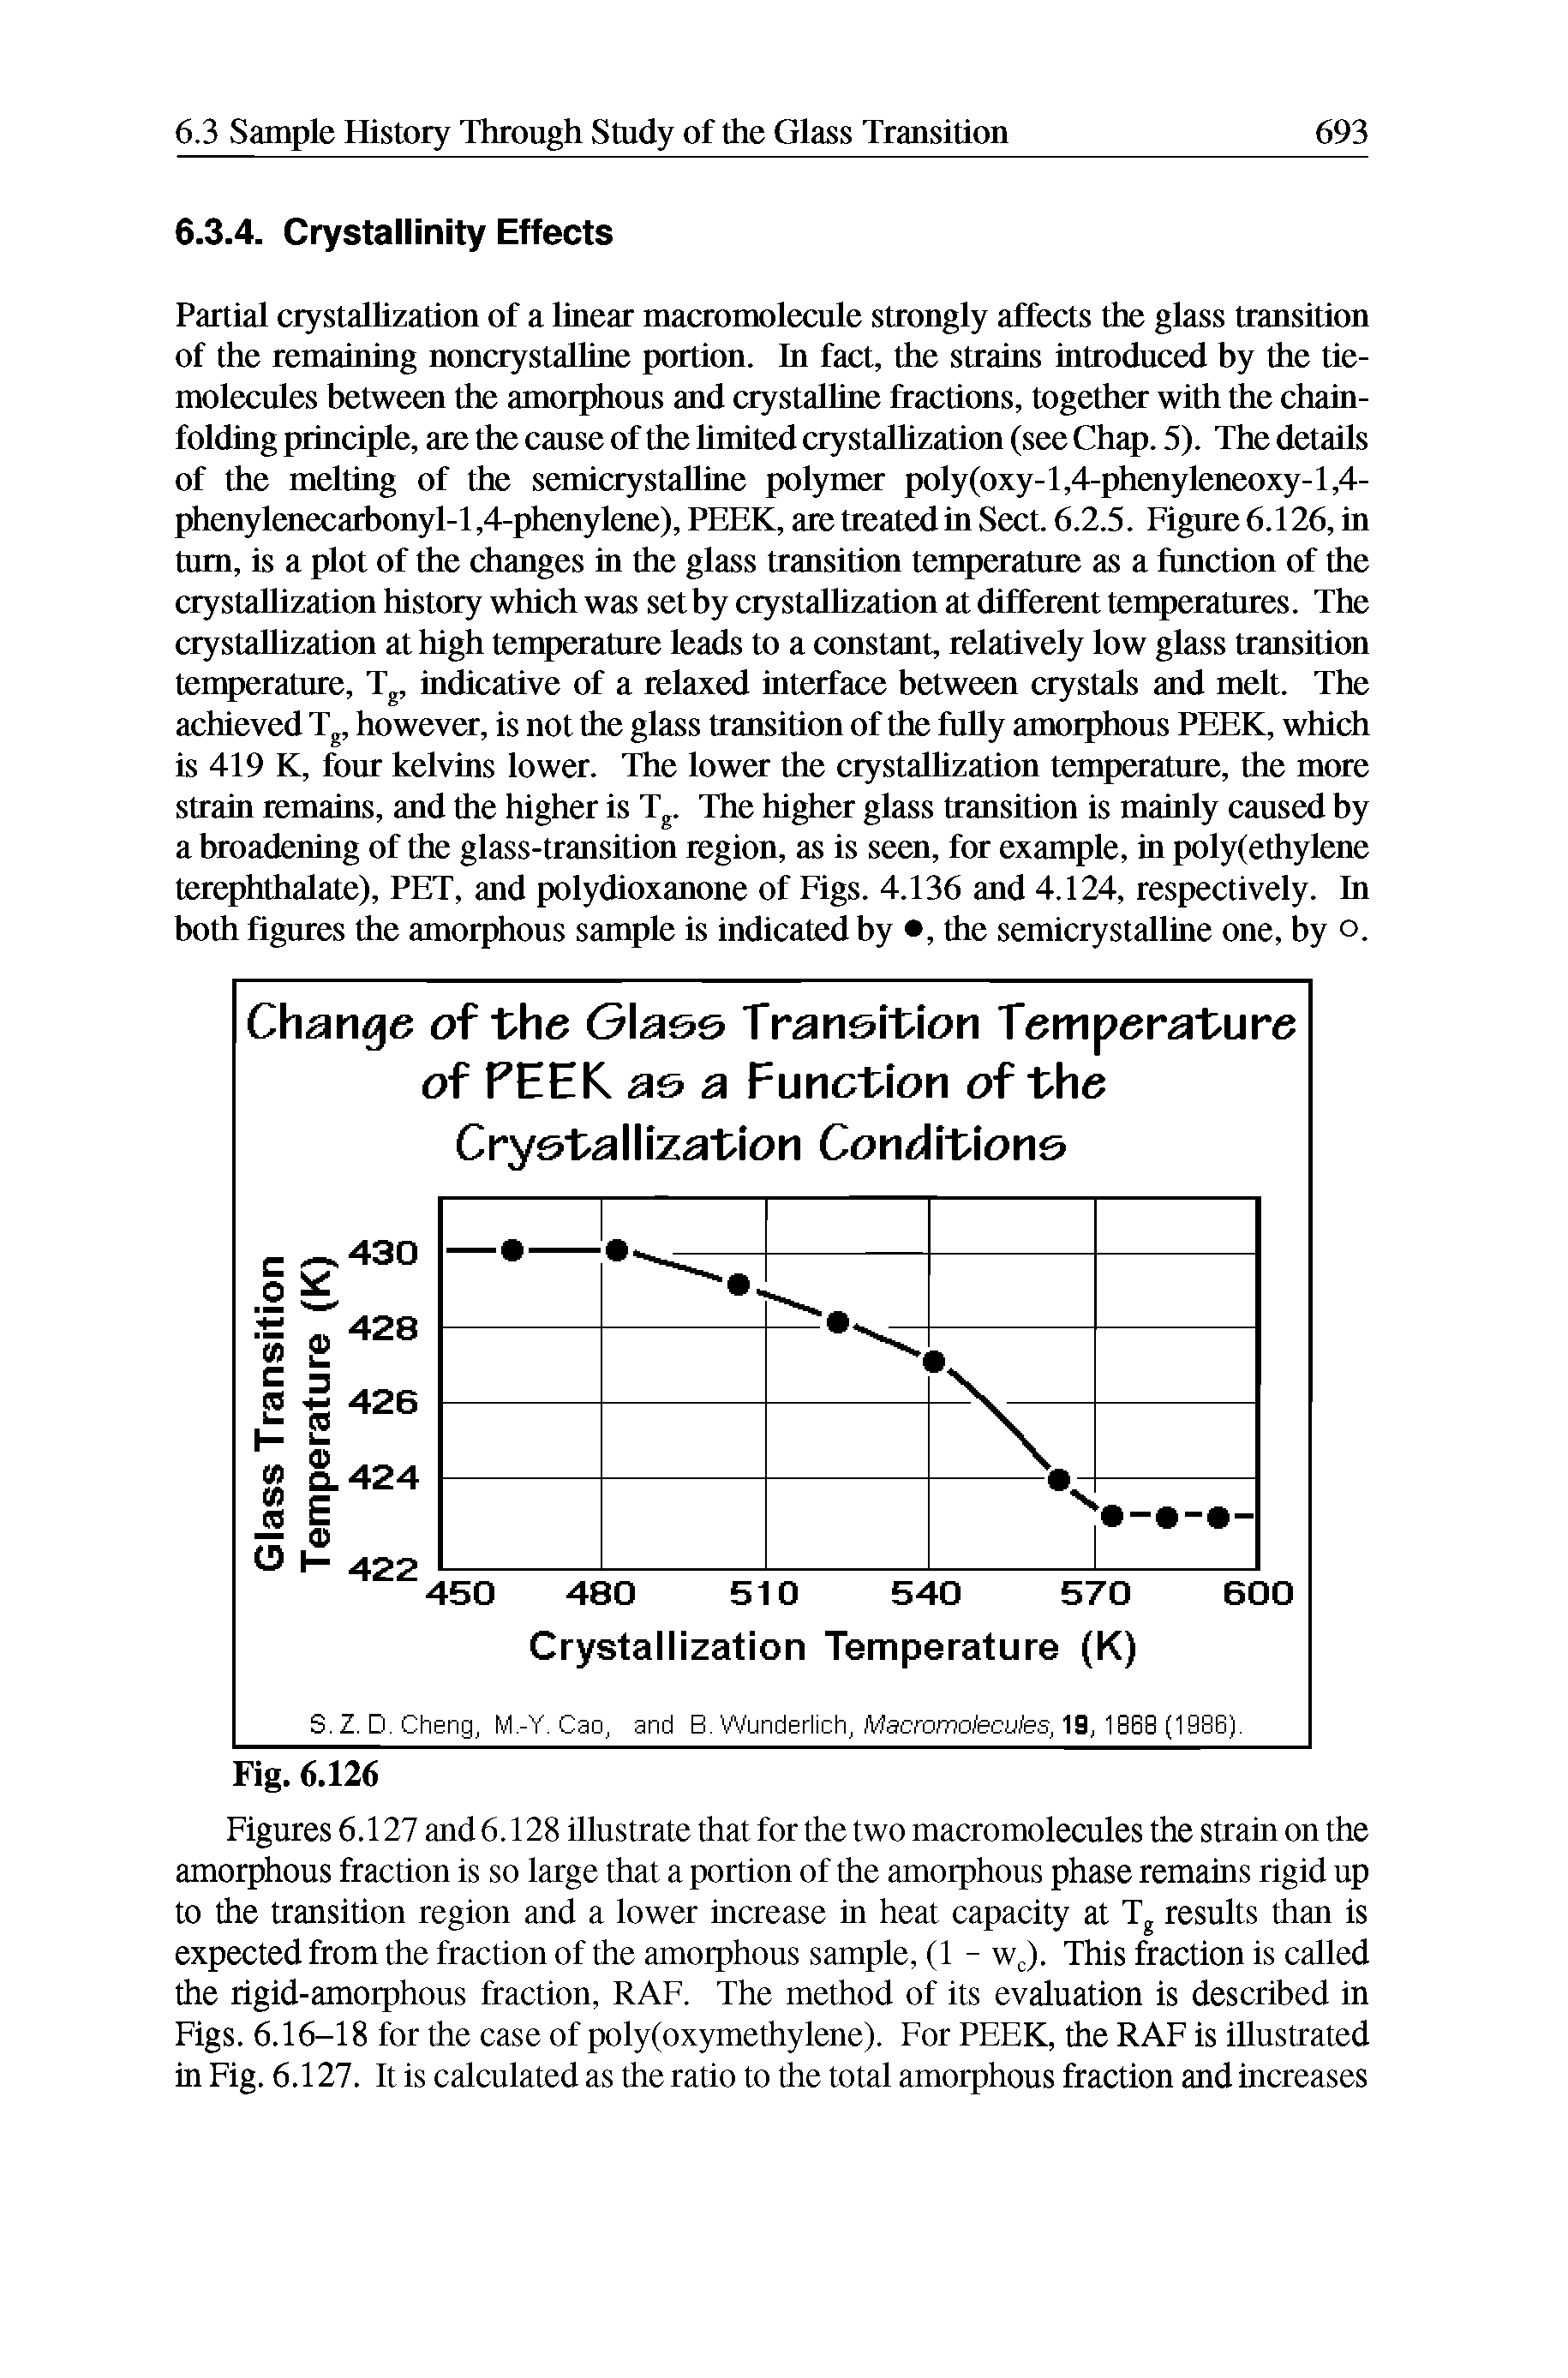 Figures 6.127 and 6.128 illustrate that for the two macromolecules the strain on the amorphous fraction is so large that a portion of the amorphous phase remains rigid up to the transition region and a lower increase in heat capacity at Tg results than is expected from the fraction of the amorphous sample, (1 - wj. This fraction is called the rigid-amorphous fraction, RAF. The method of its evaluation is described in Figs. 6.16-18 for the case of poly(oxymethylene). For PEEK, the RAF is illustrated in Fig. 6.127. It is calculated as the ratio to the total amorphous fraction and increases...